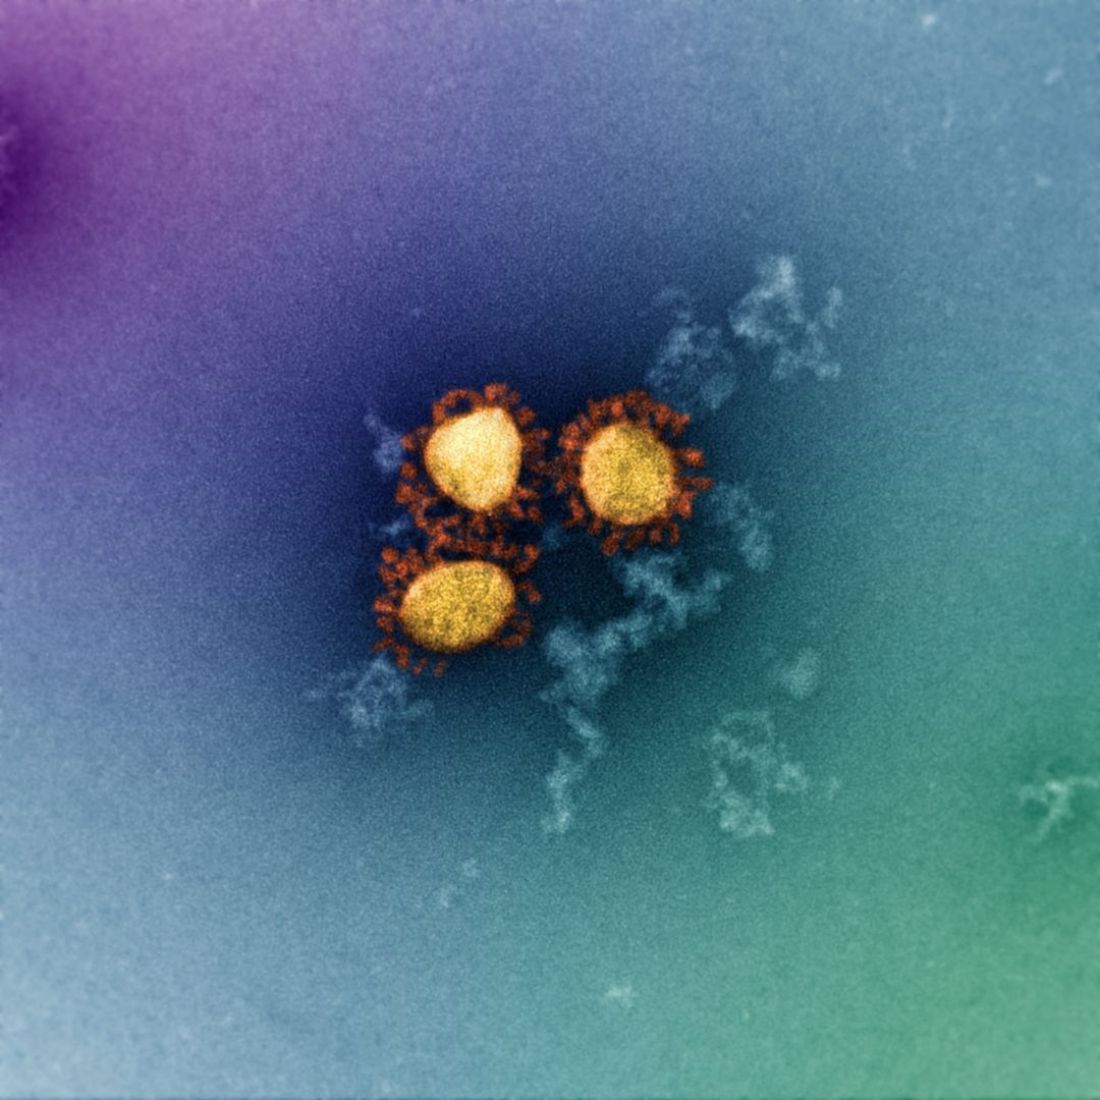 An electron microscopy image of the Omicron variant of SARS-CoV-2